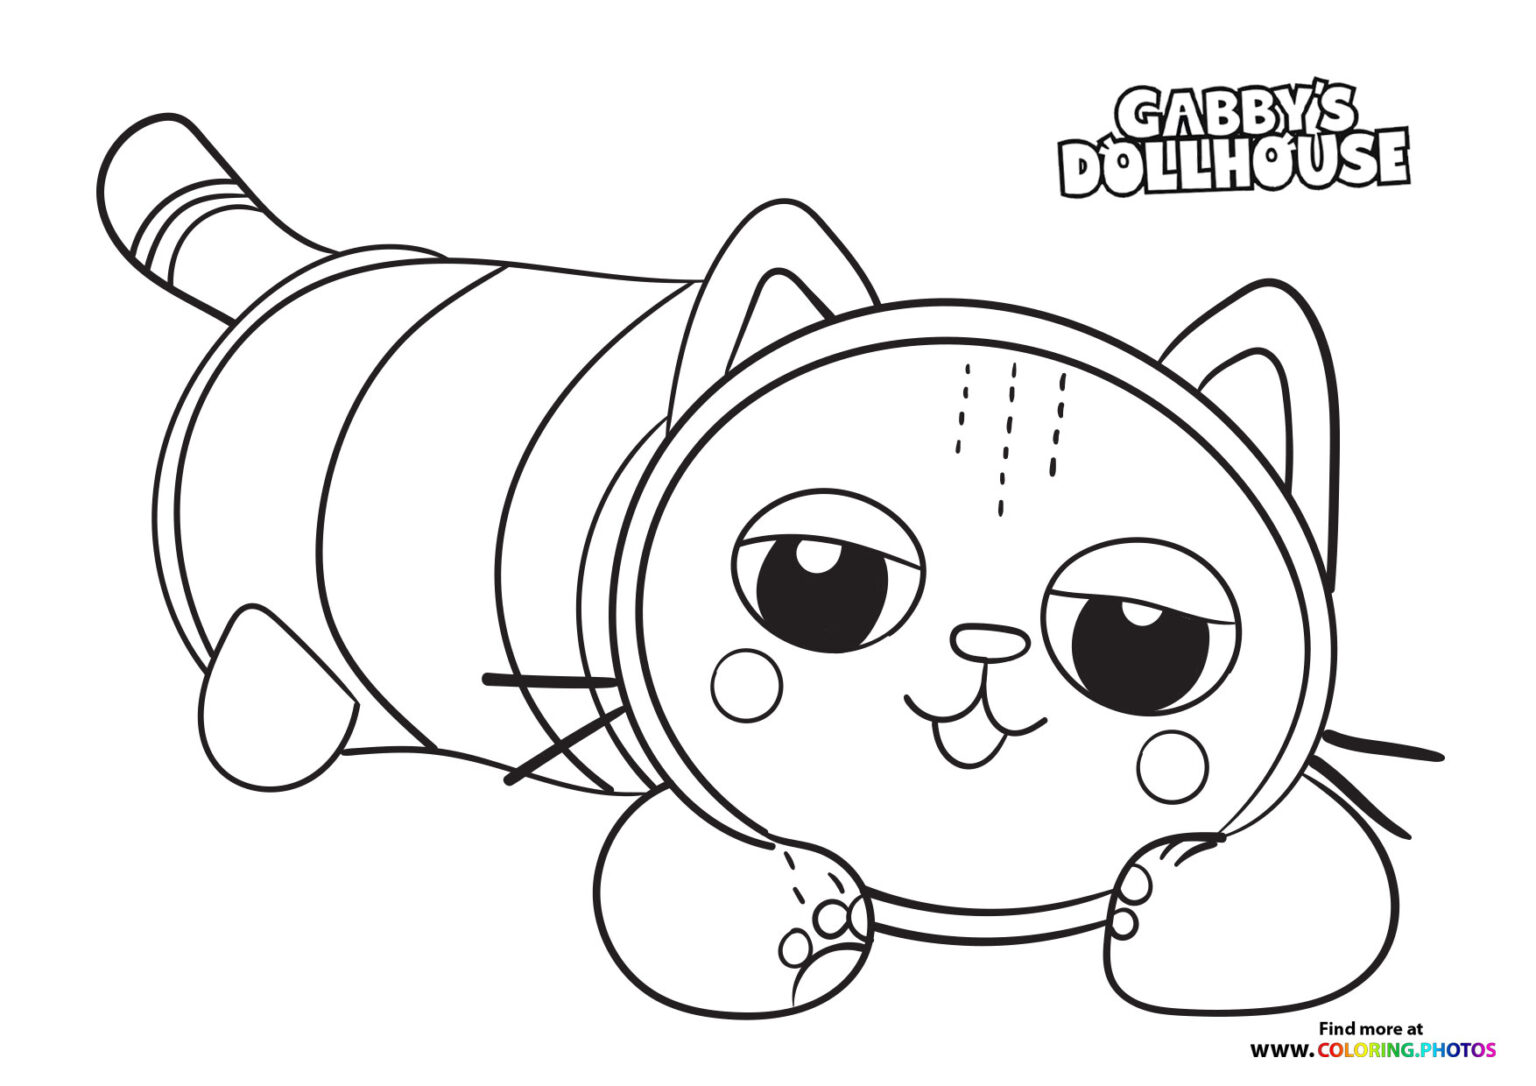 Mercat - Gaby's Dollhouse - Coloring Pages for kids